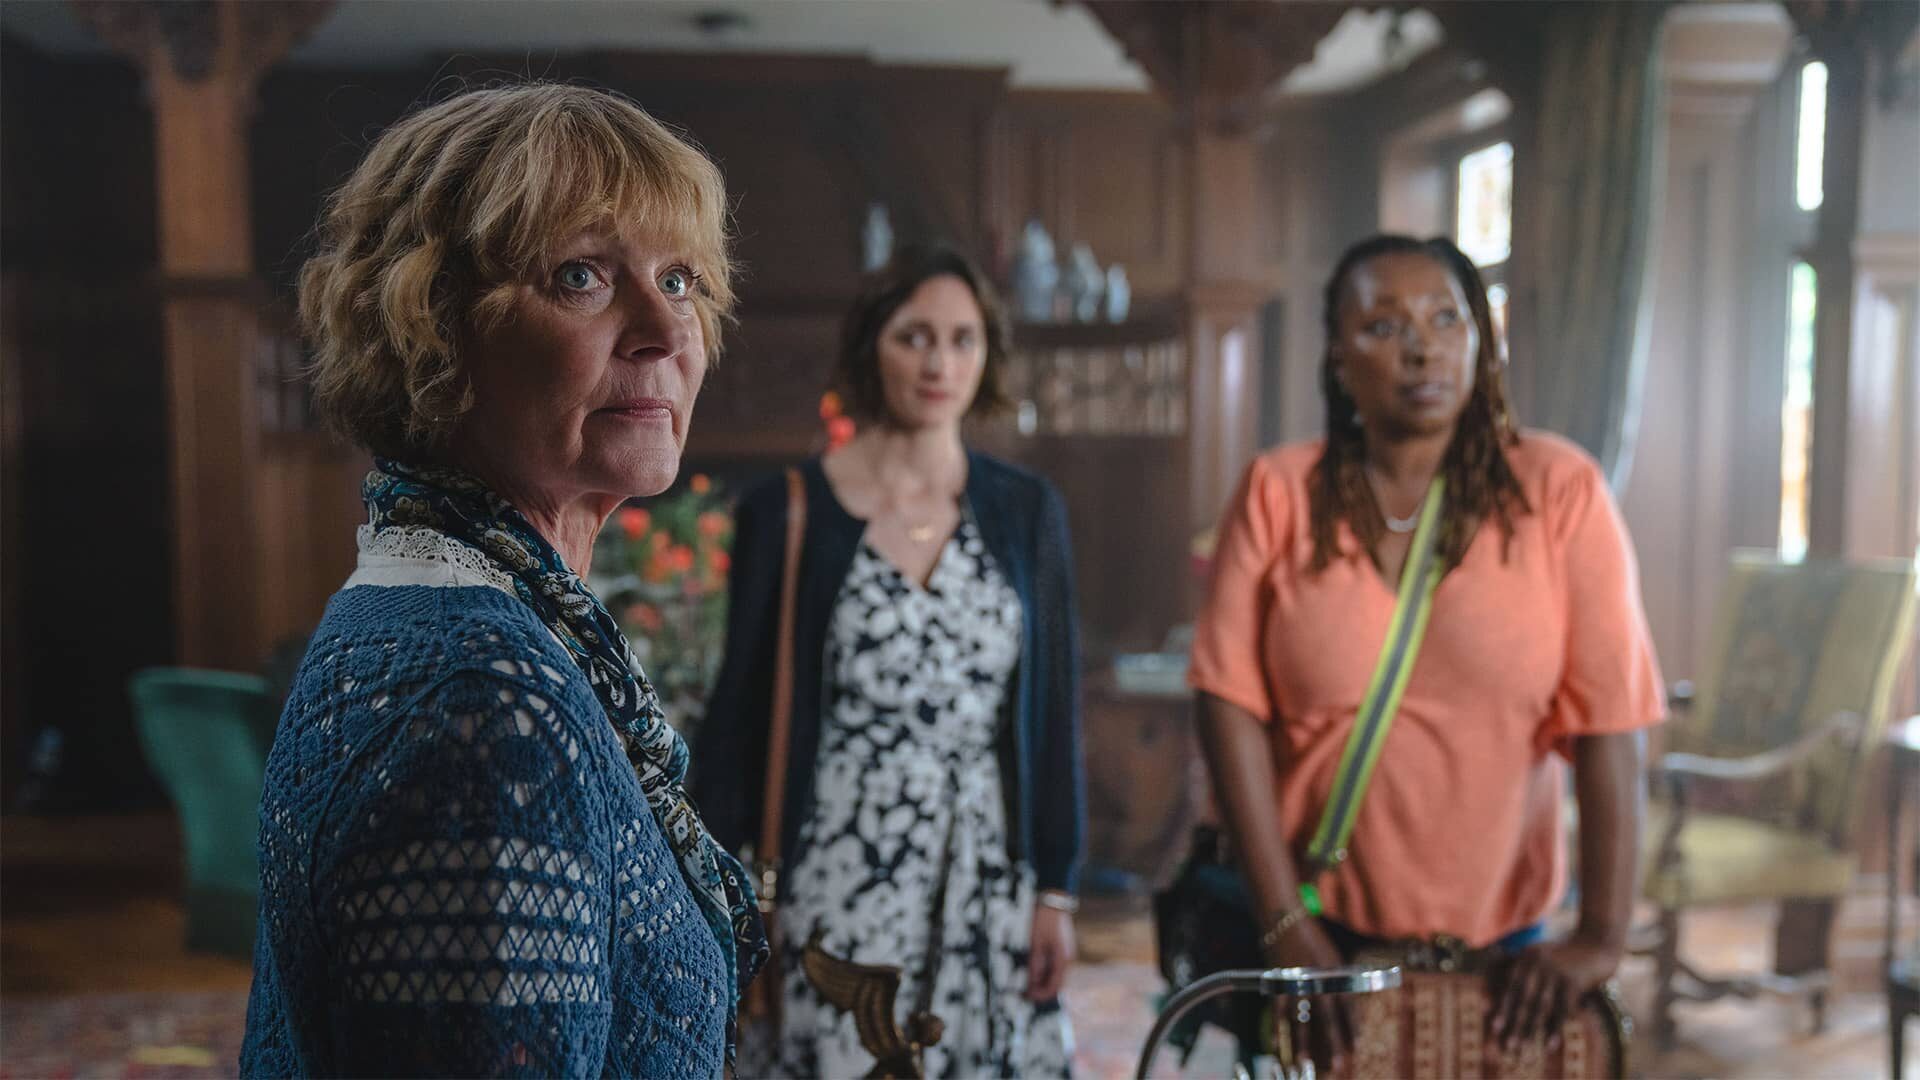 Samantha Bond as Judith Potts, Cara Horgan as Becks Starling and Jo Martin as Suzie Harris standing together in The Marlow Murder Club